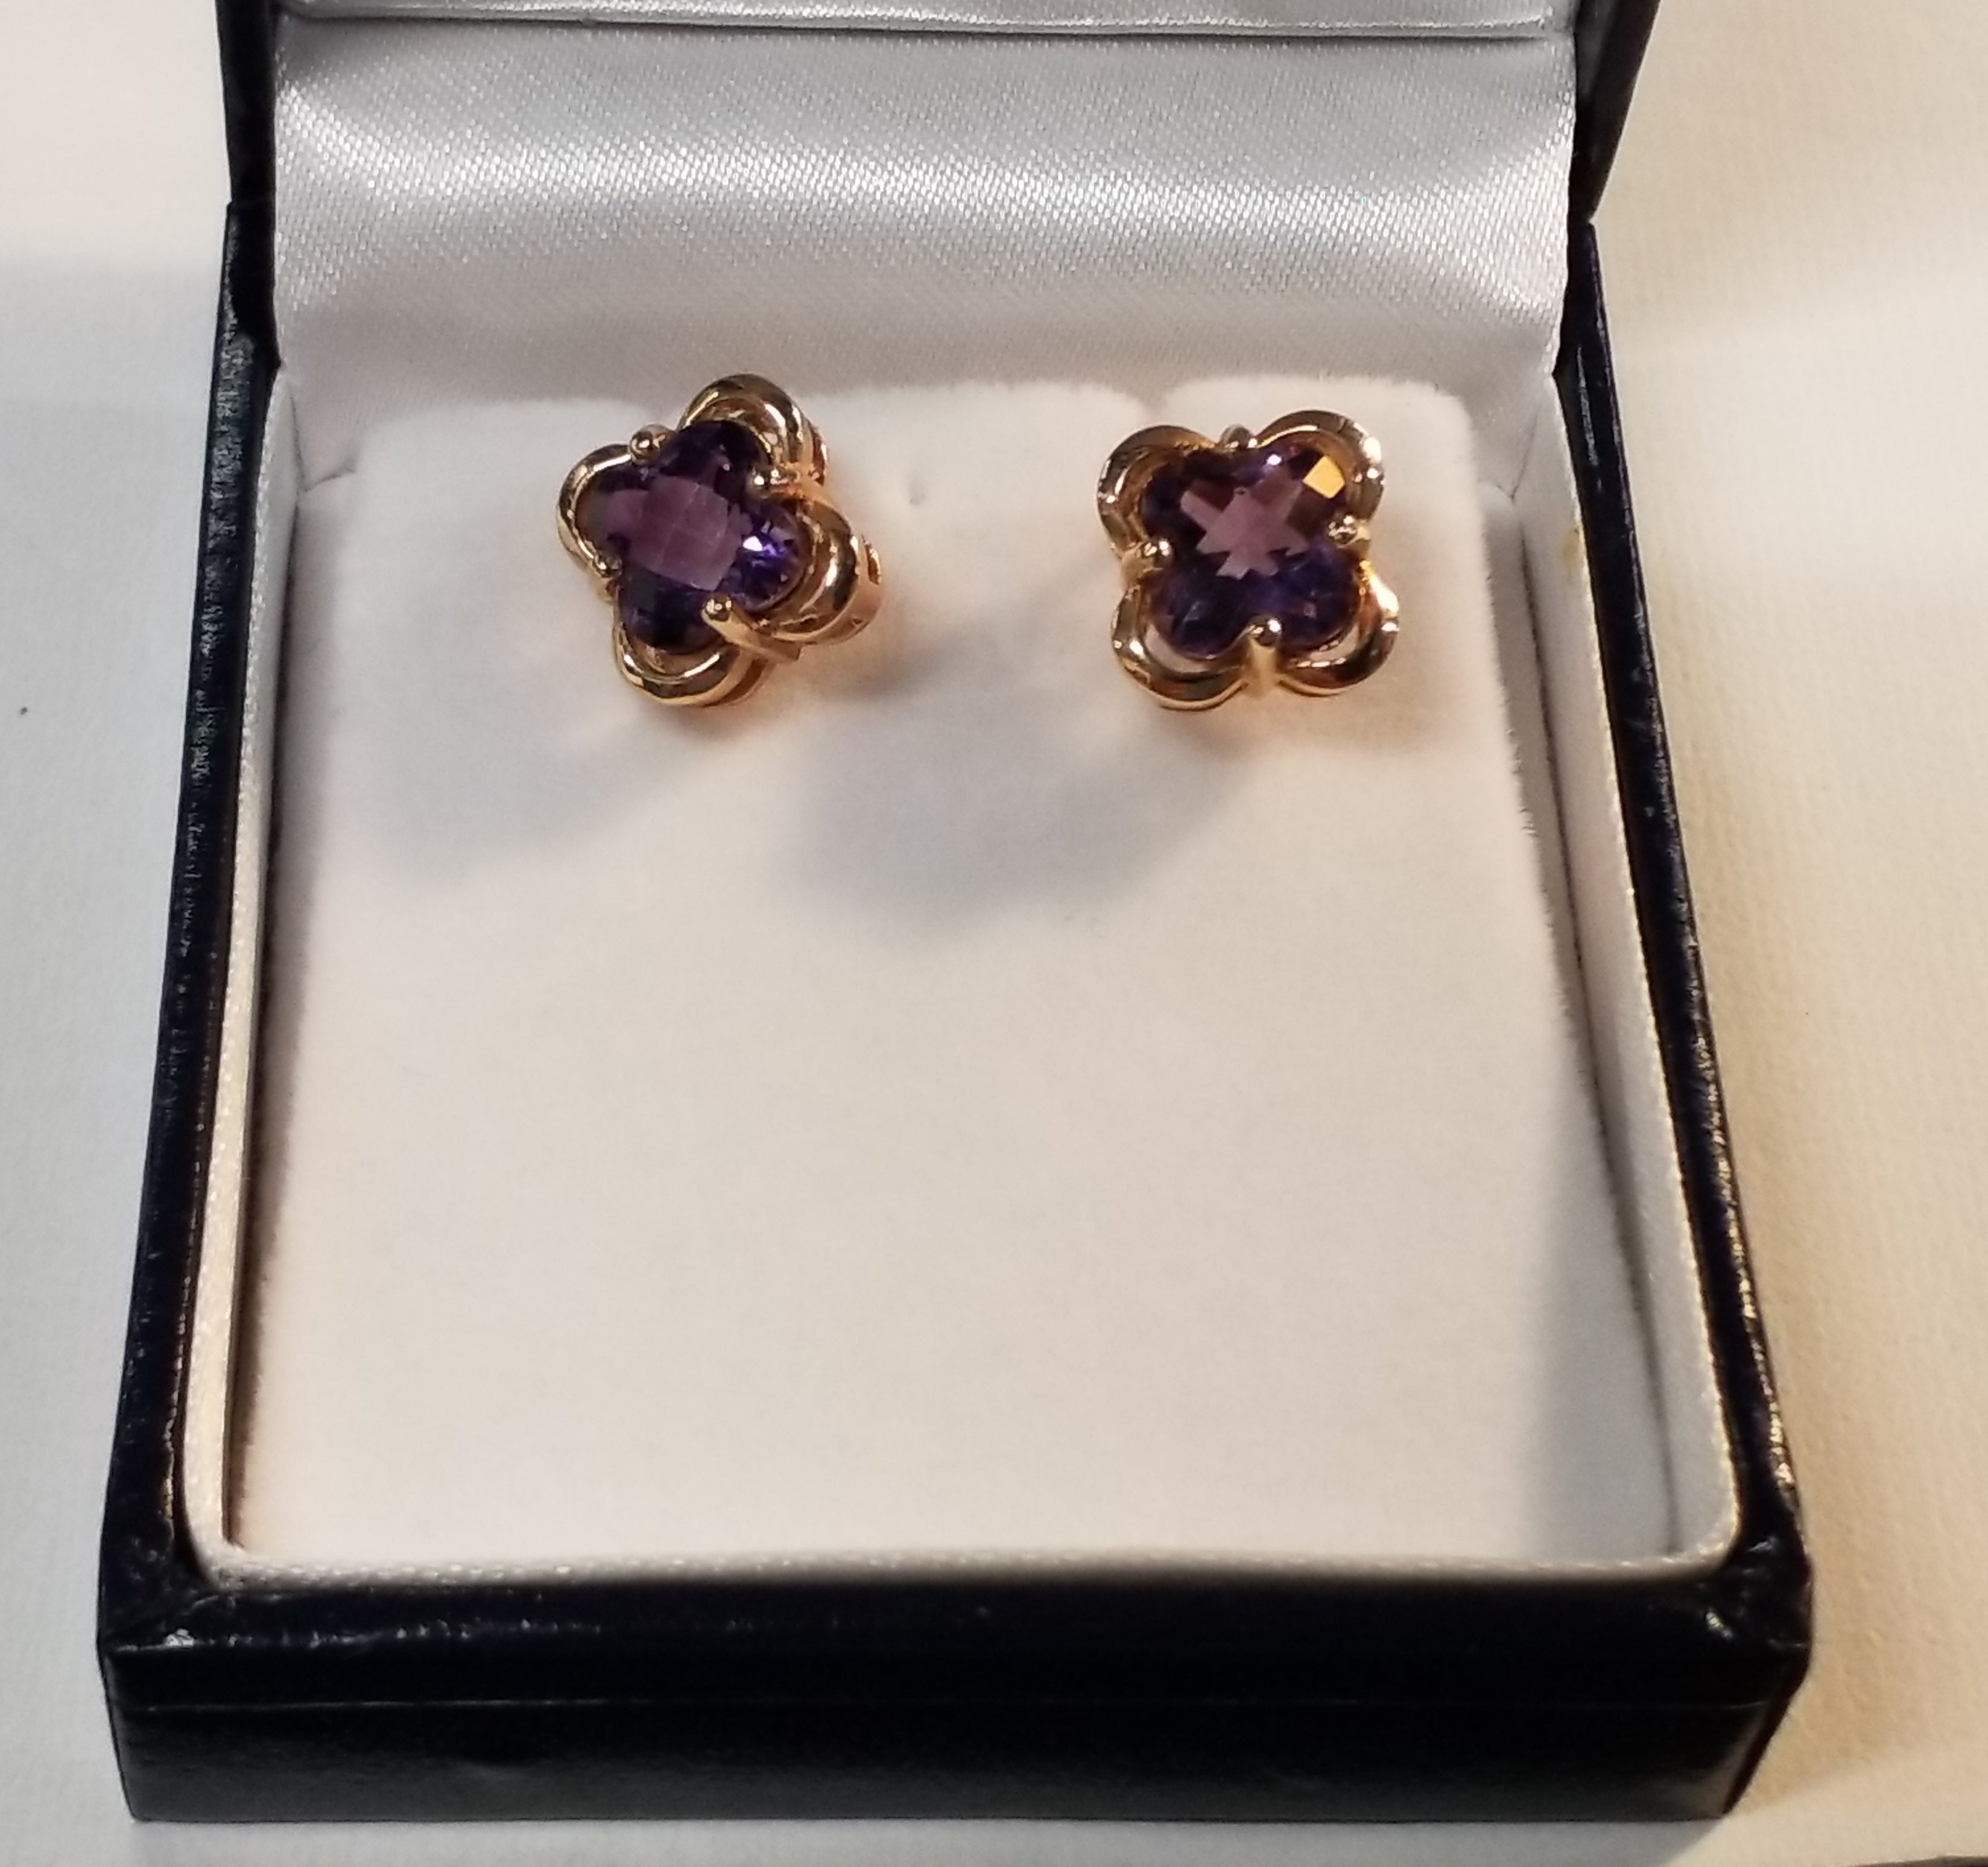 Floral Cut Amethyst Earrings - Matching Pendant also available